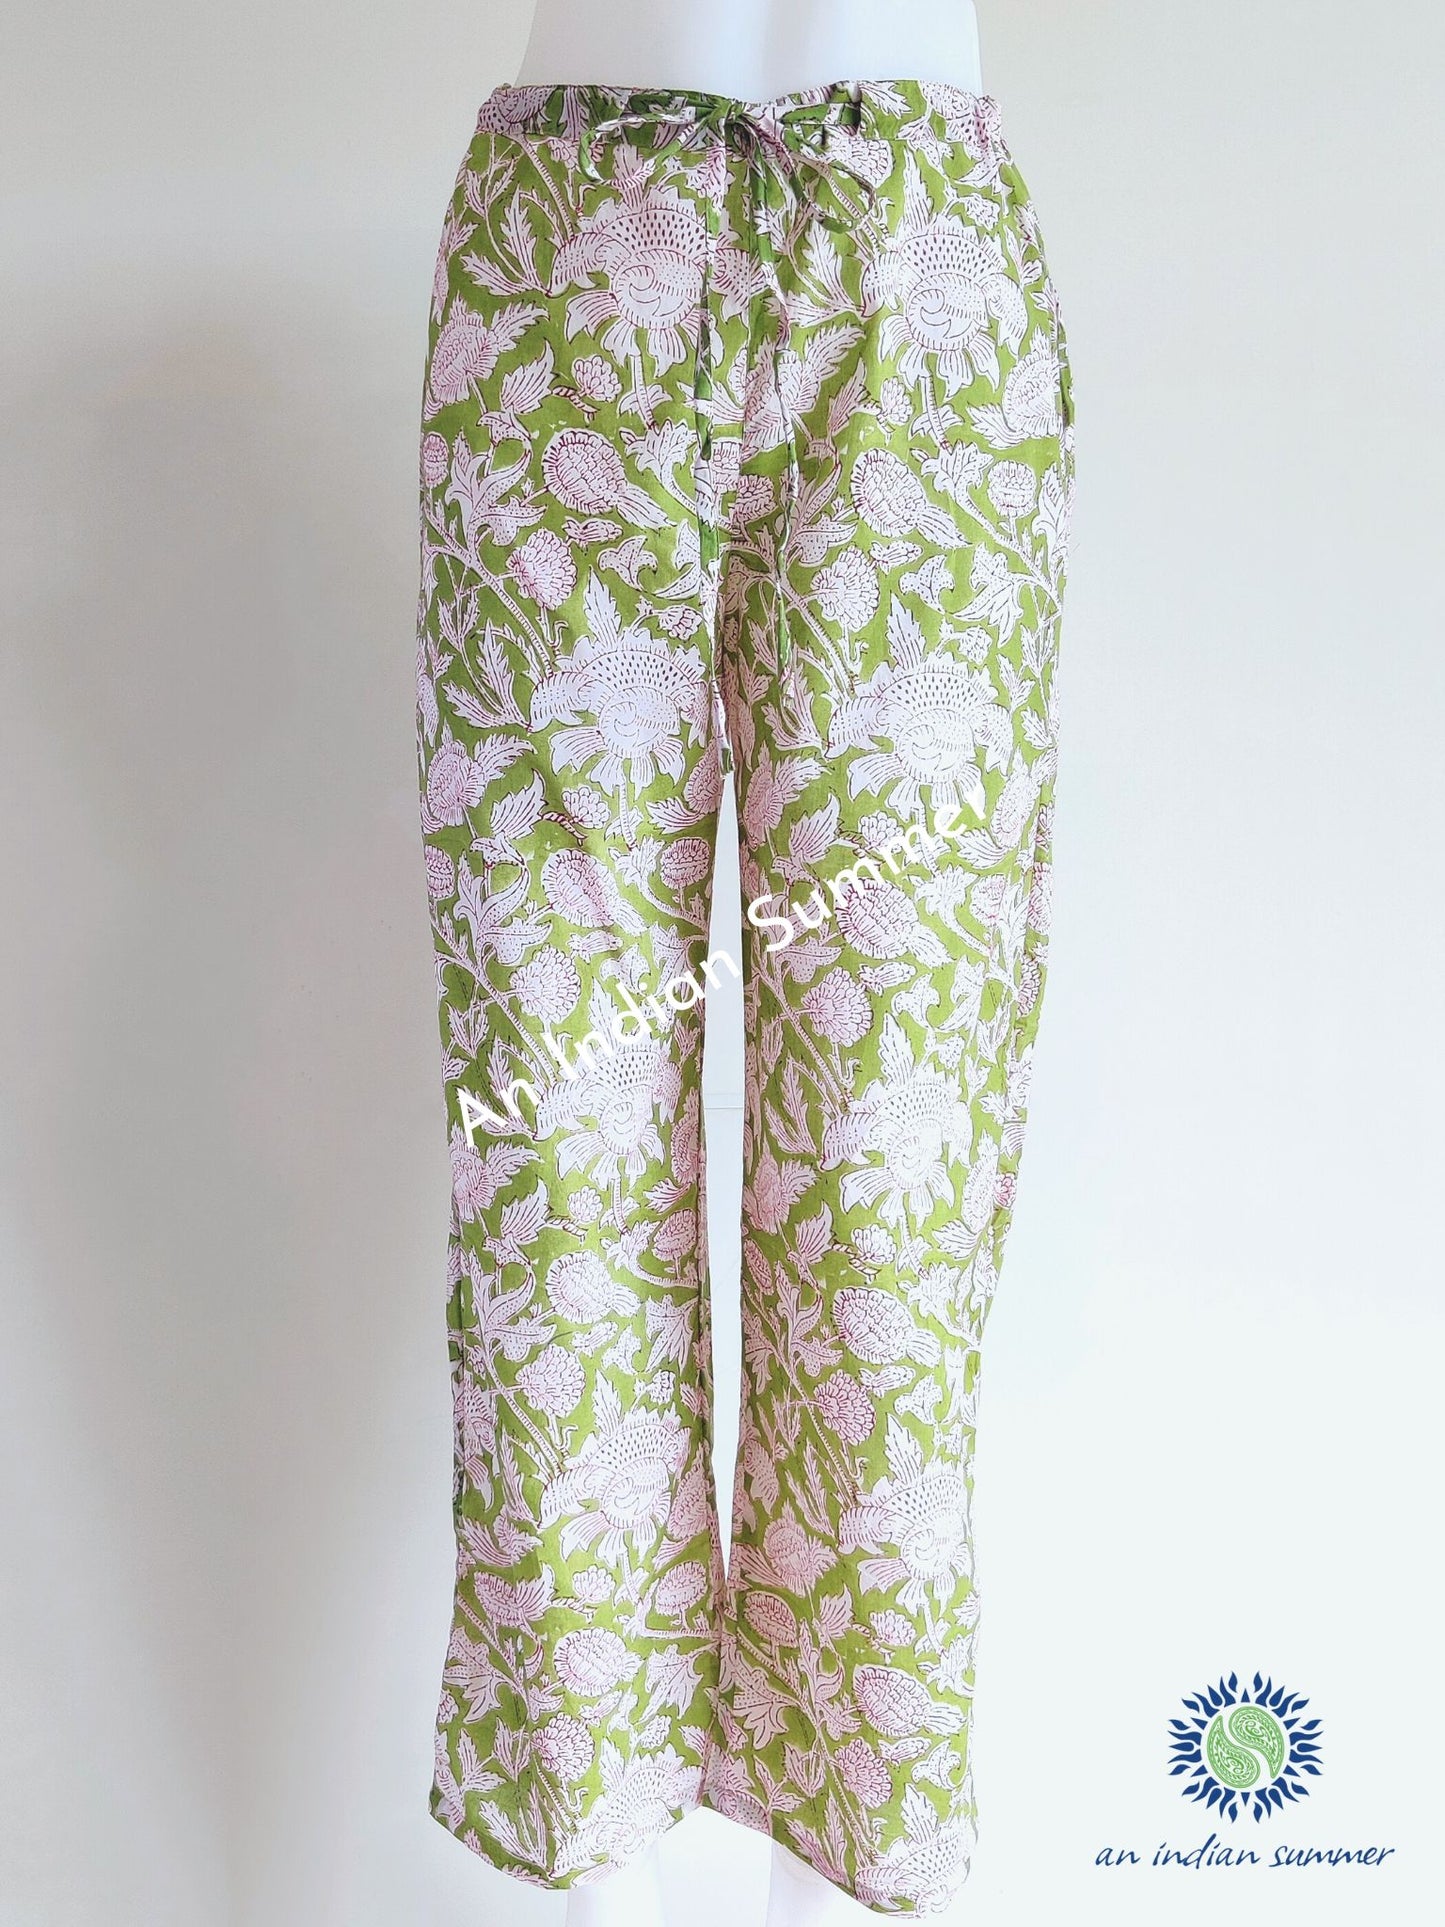 Cotton Trousers | Thistle | Apple Green | Botanical Block Print | Hand Block Printed | Cotton Voile | An Indian Summer | Seasonless Timeless Sustainable Ethical Authentic Artisan Conscious Clothing Lifestyle Brand